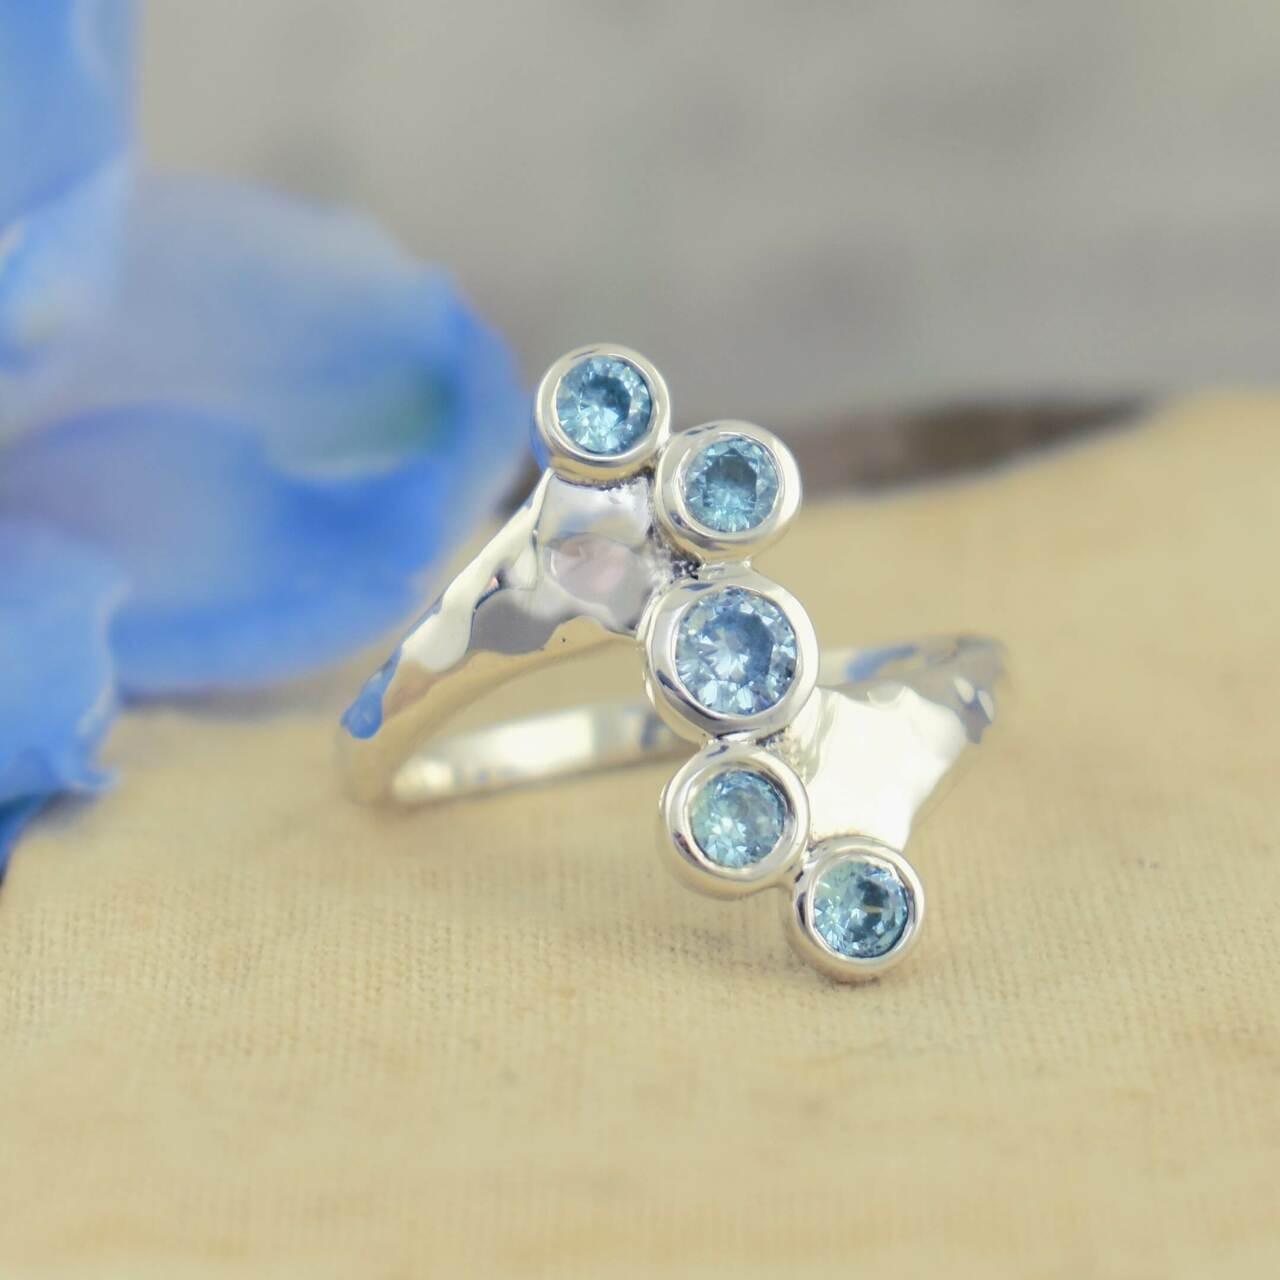 .925 sterling silver and blue cz ring